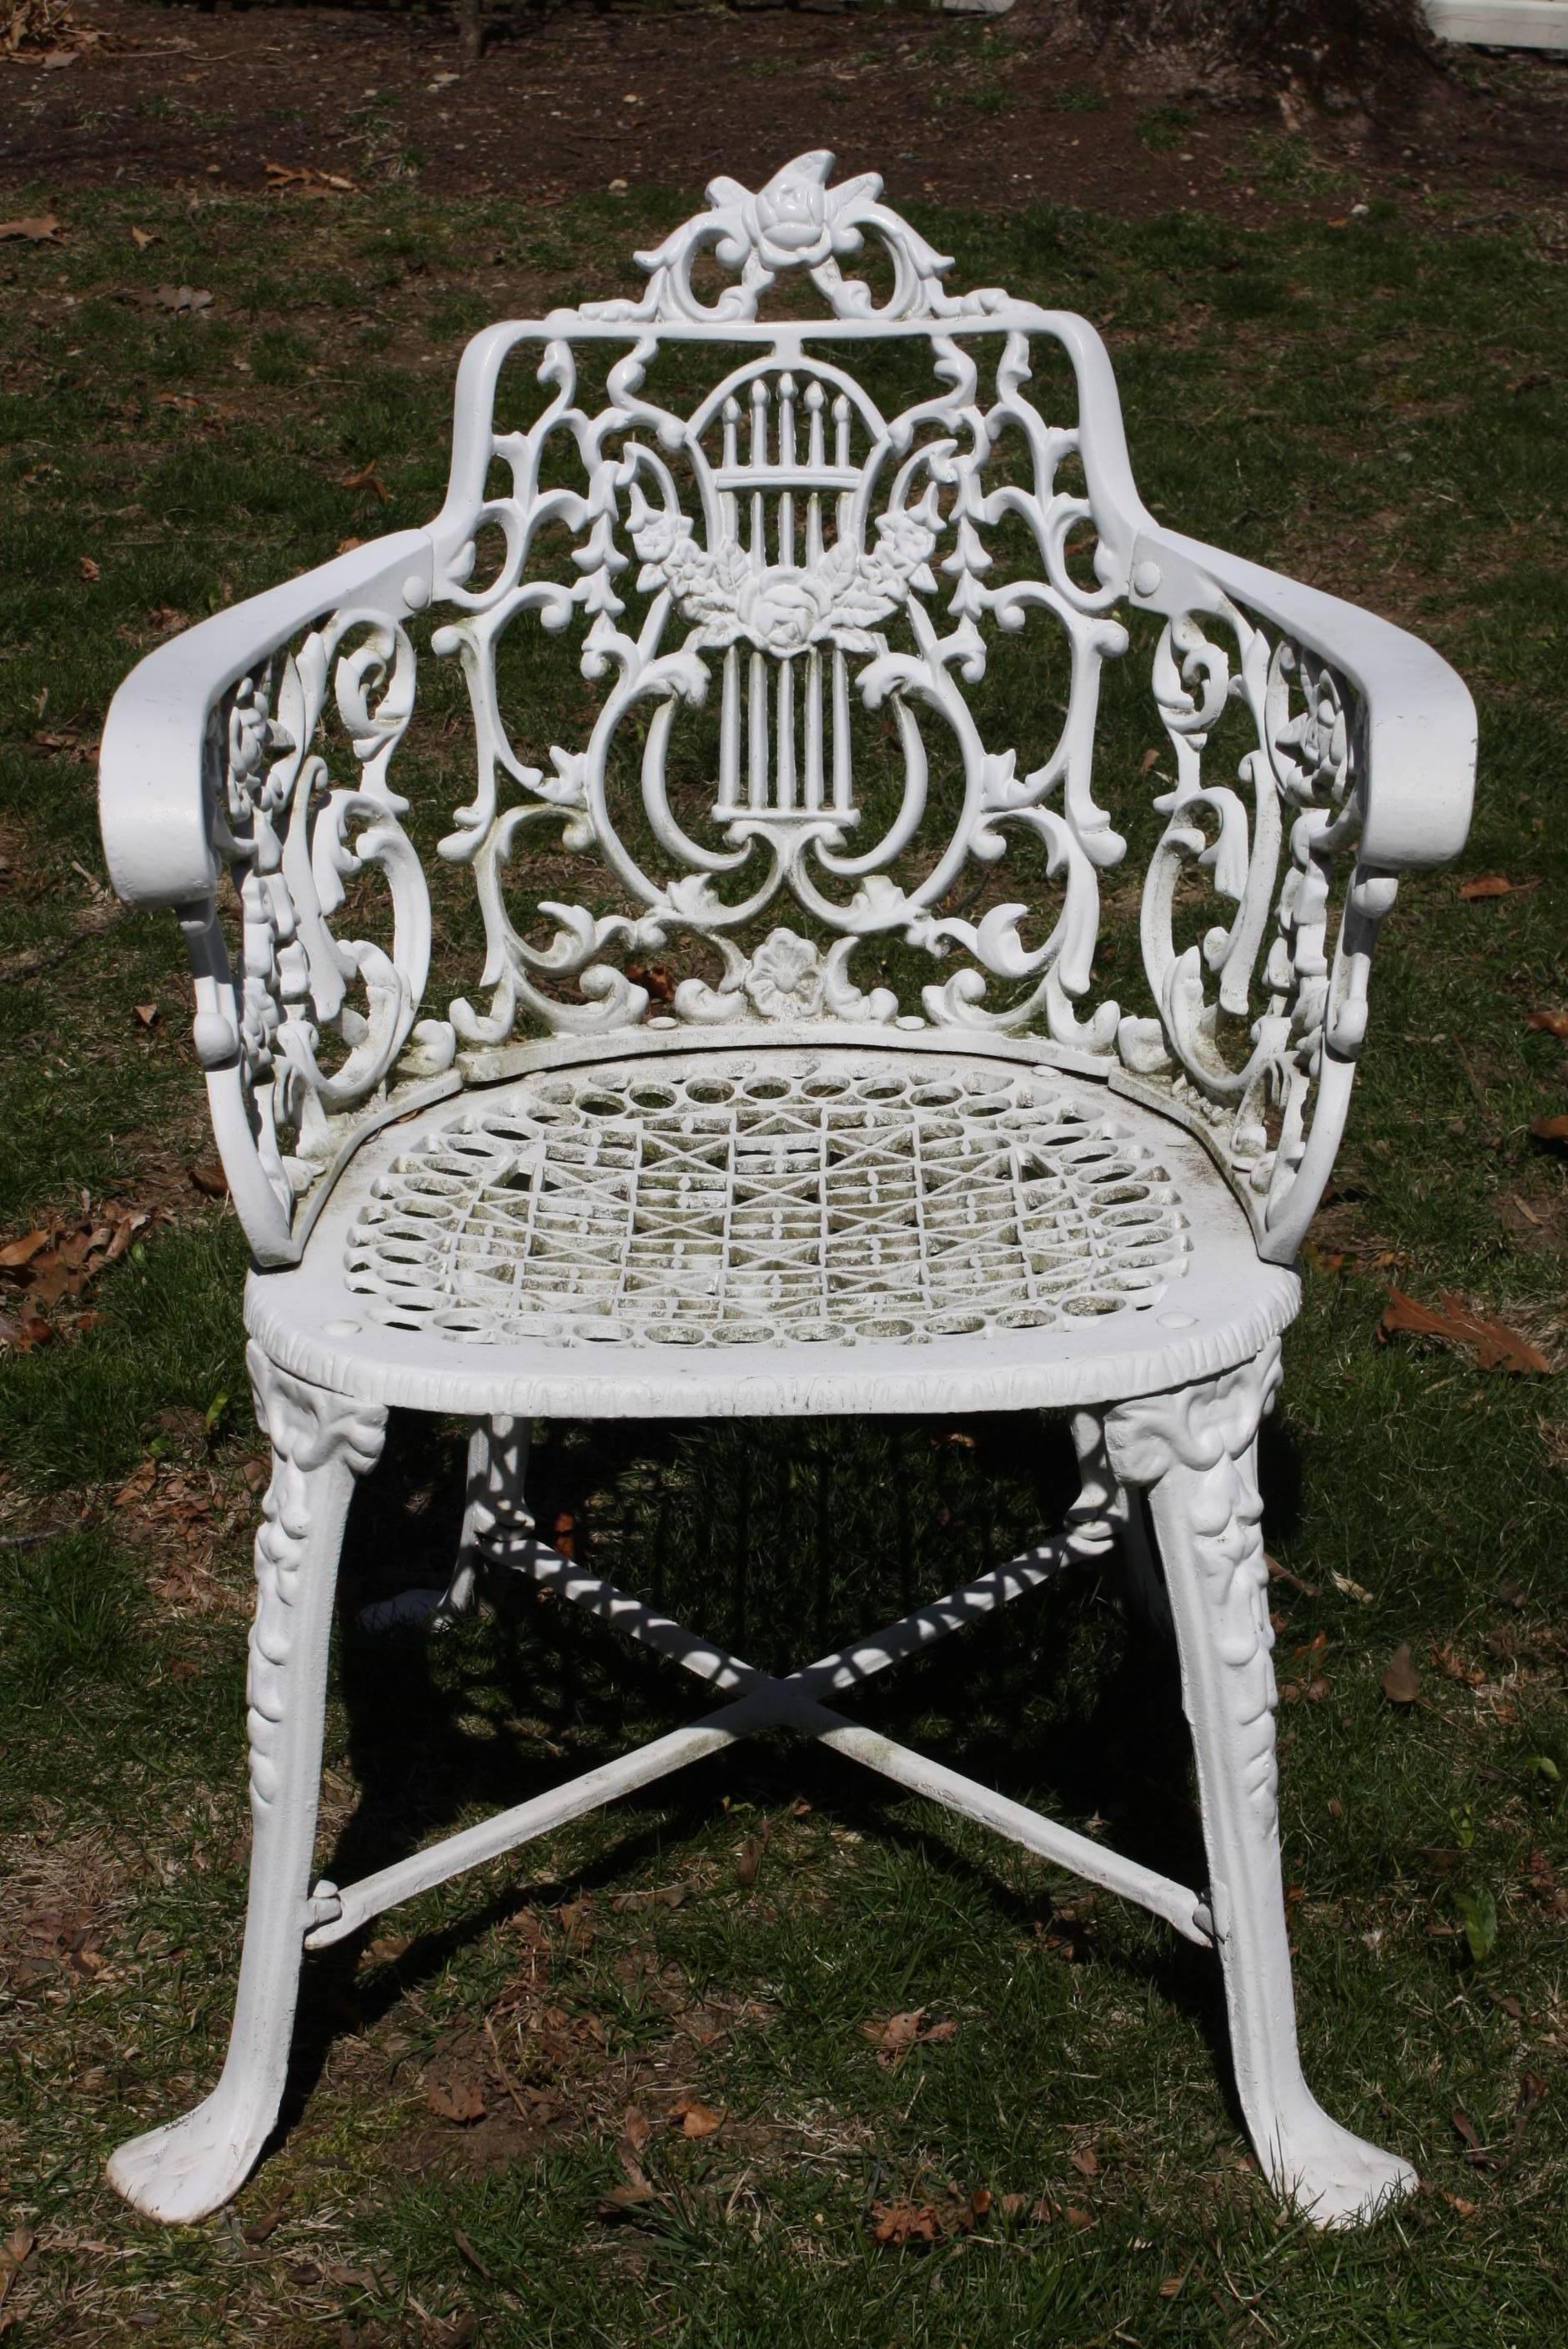 American Ornate Victorian Style Garden Dining Set in Cast Aluminum